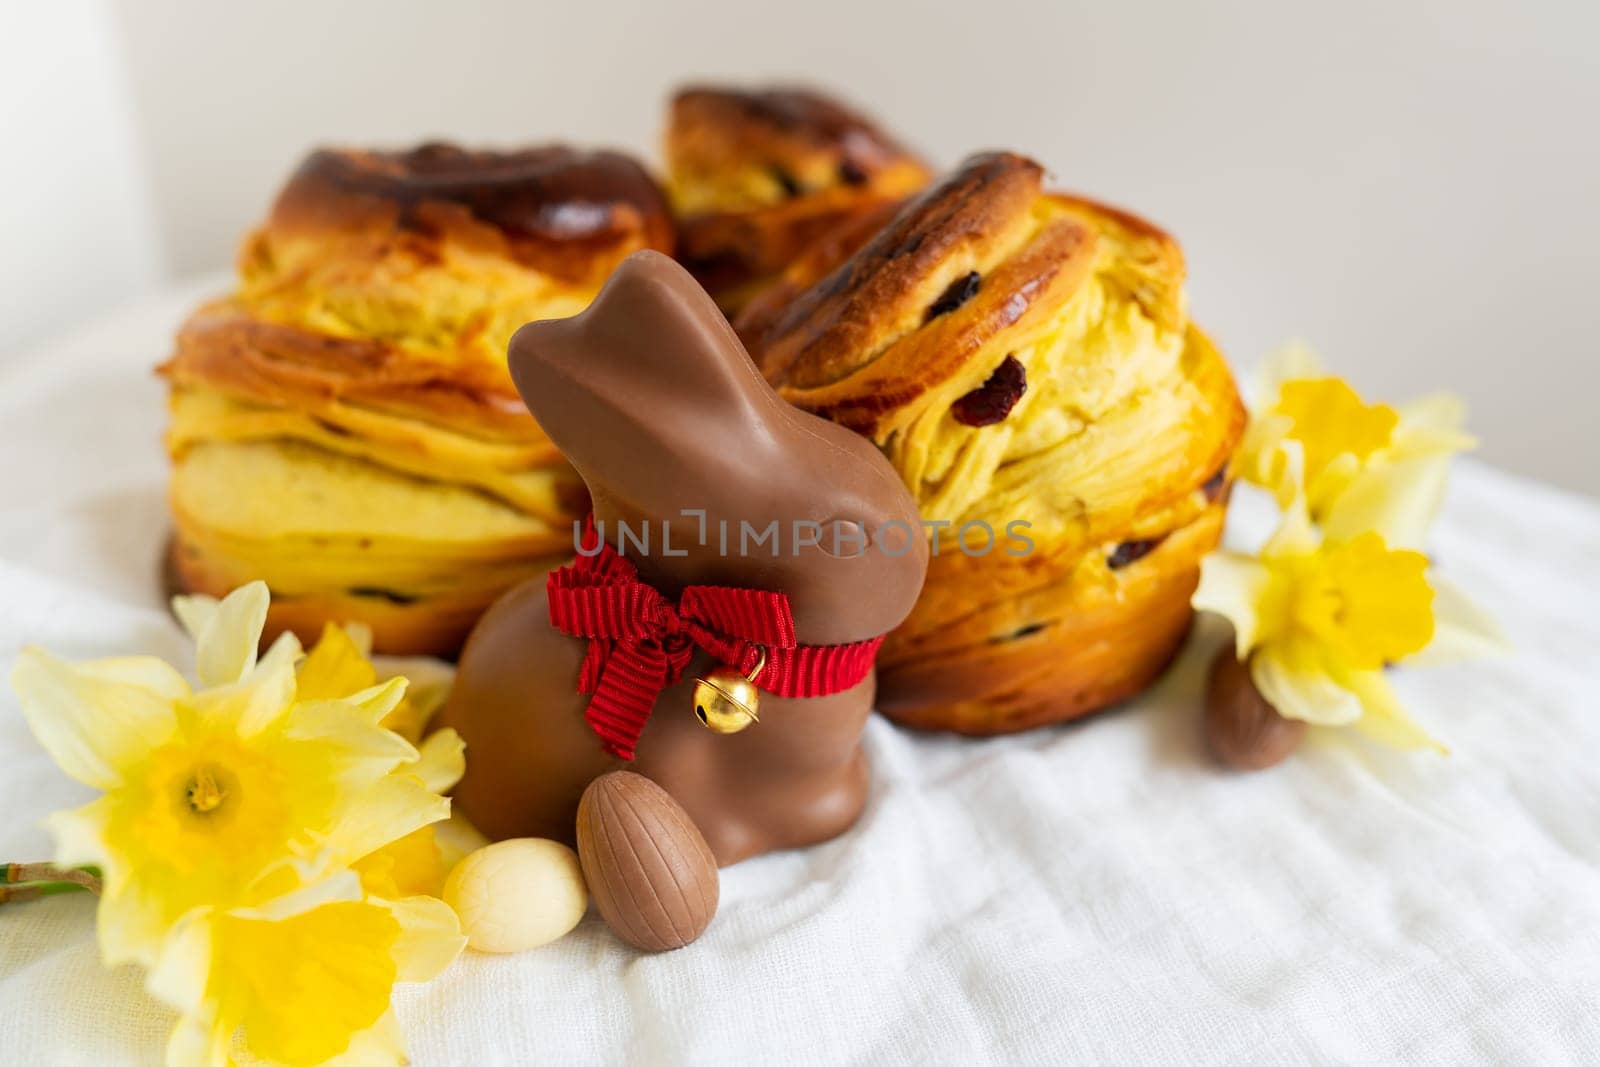 Homemade Easter traditional pastries lie on a green napkin along with daffodil flowers, rabbit, chocolate eggs. Easter baking and decoration. by sfinks